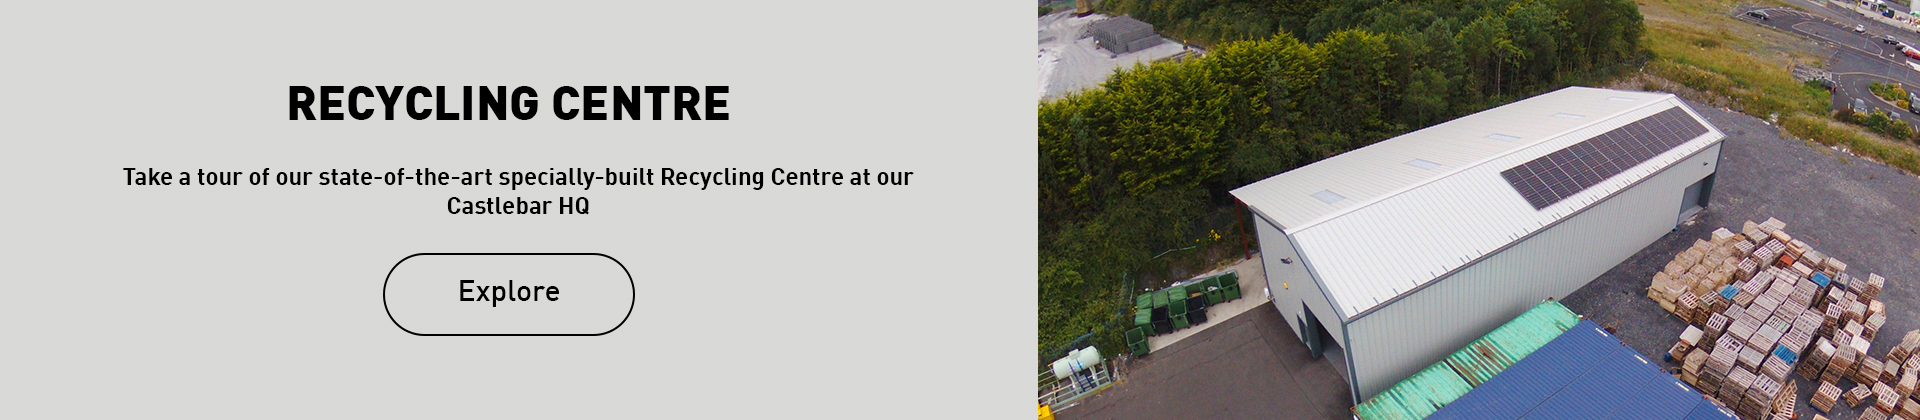 Take a tour of our state-of-the-art specially-built Recycling Centre at our Intersport Elverys HQ in Castlebar